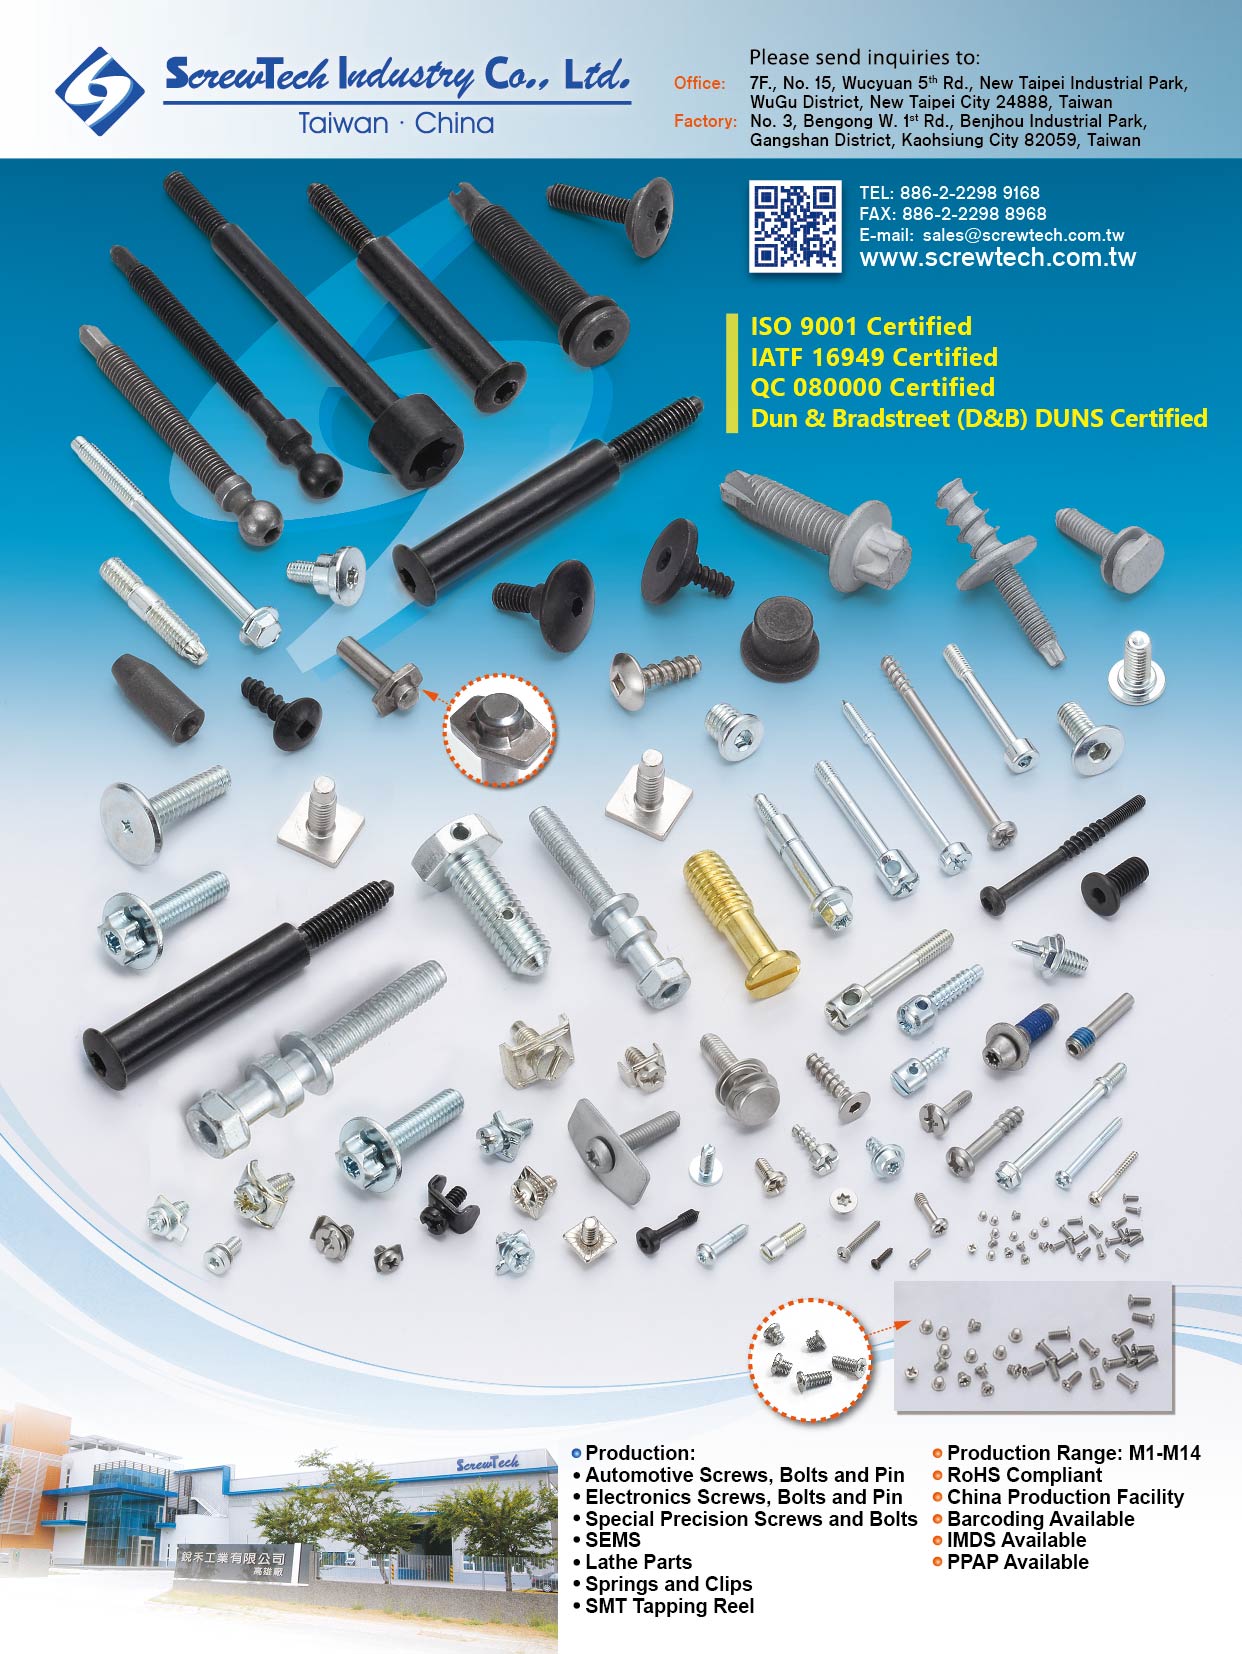 Automotive Screws Automotive Screws, Automotive Bolts, Automotive Pin, Electronic Screws, Electronic Bolts, Electronic Pin, Special Precision Screws, Special Precision Bolts, SEMS, Lathe Parts, Springs and Clips, SMT Tapping Reel